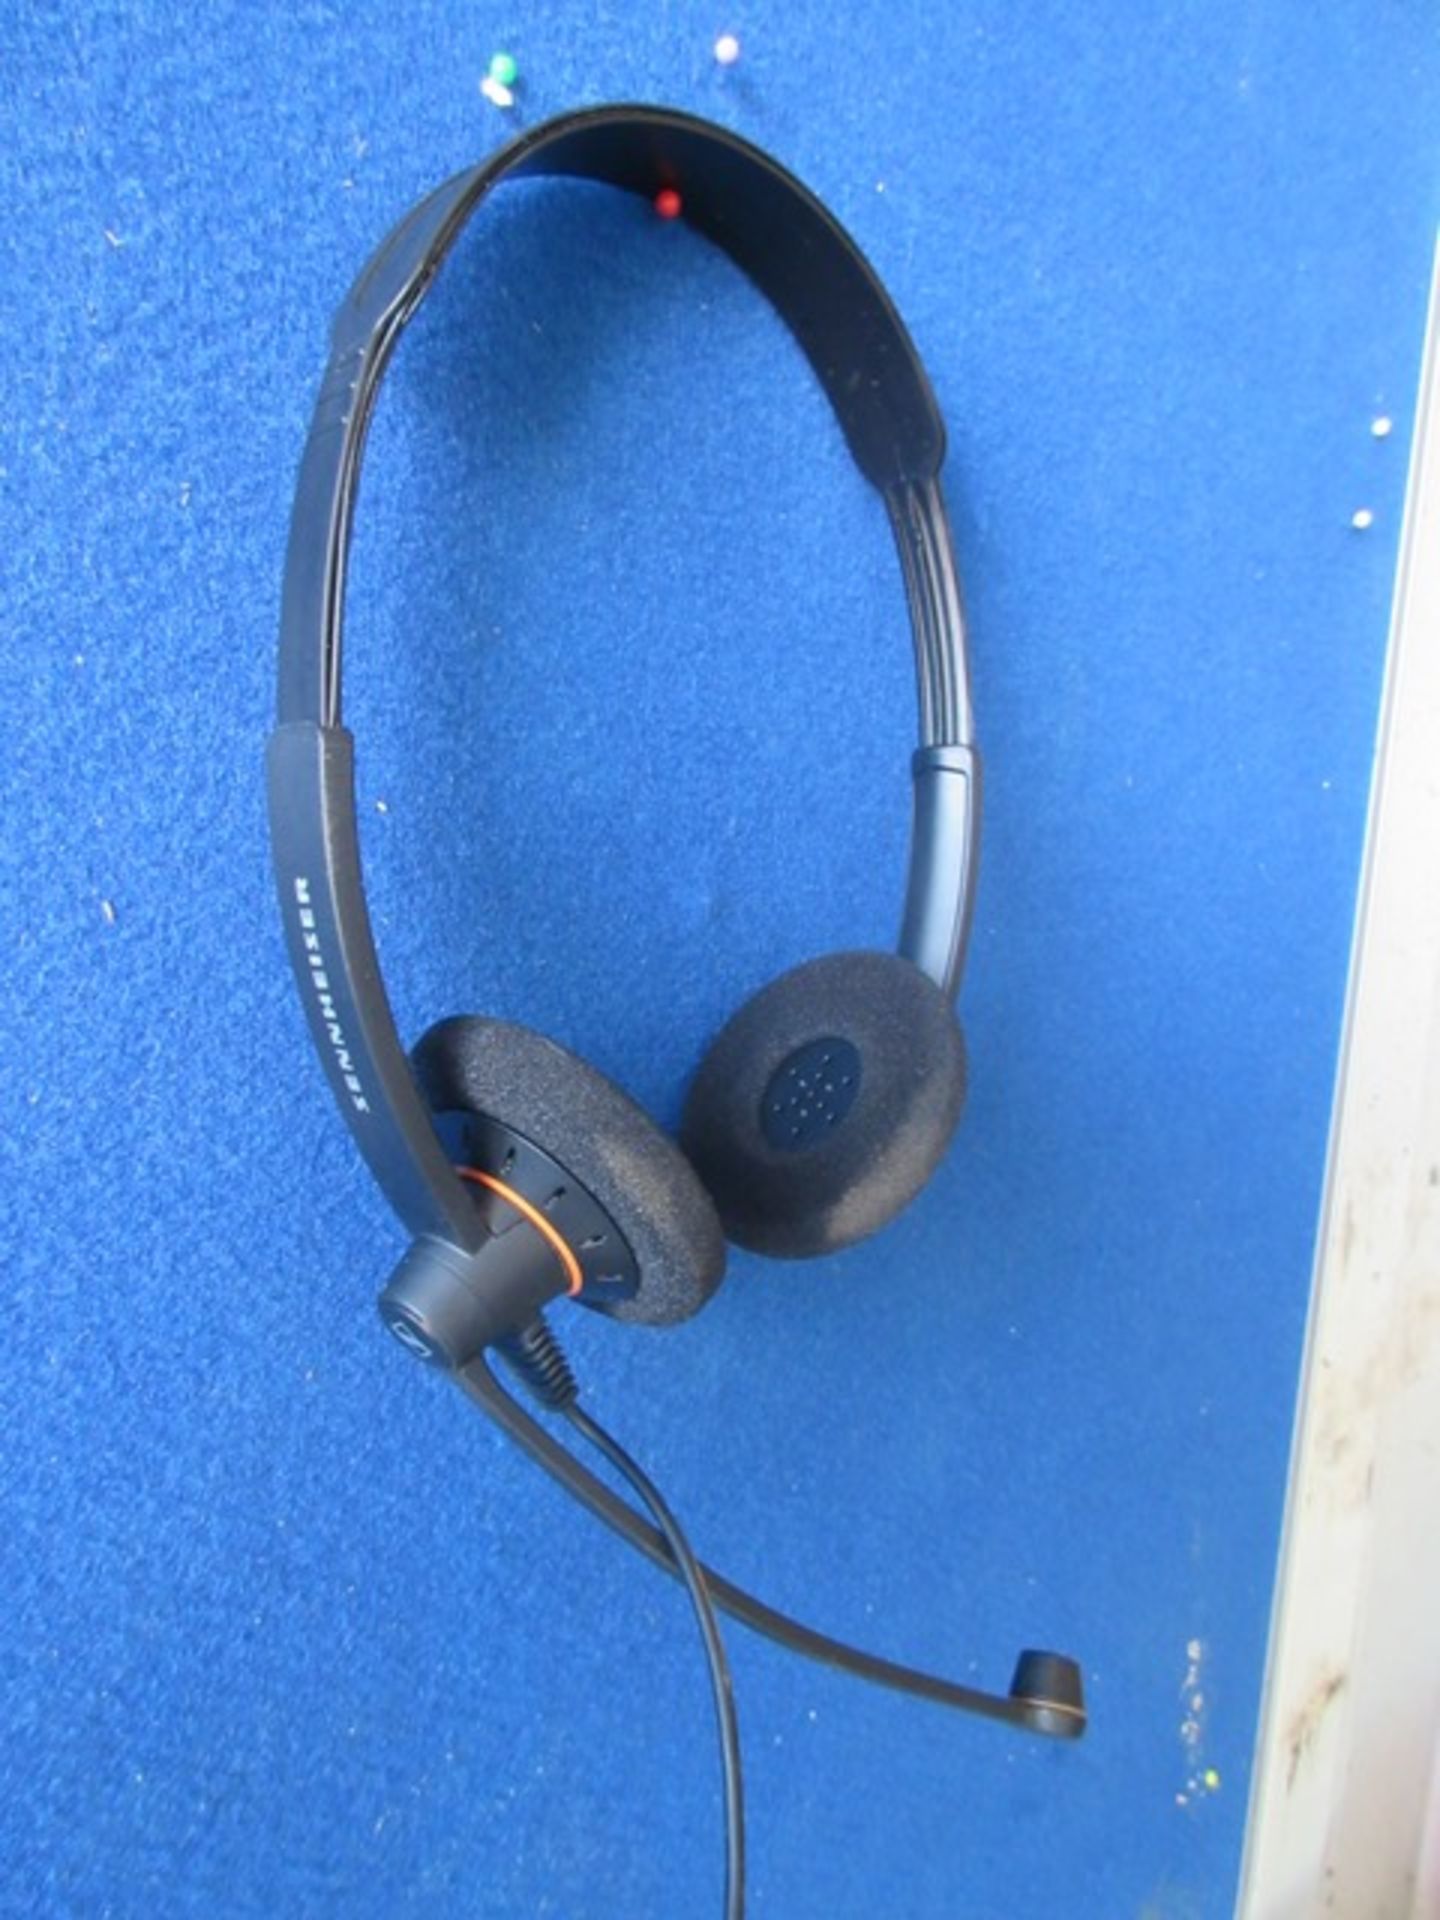 Sennheiser headsets, approx 40 in total